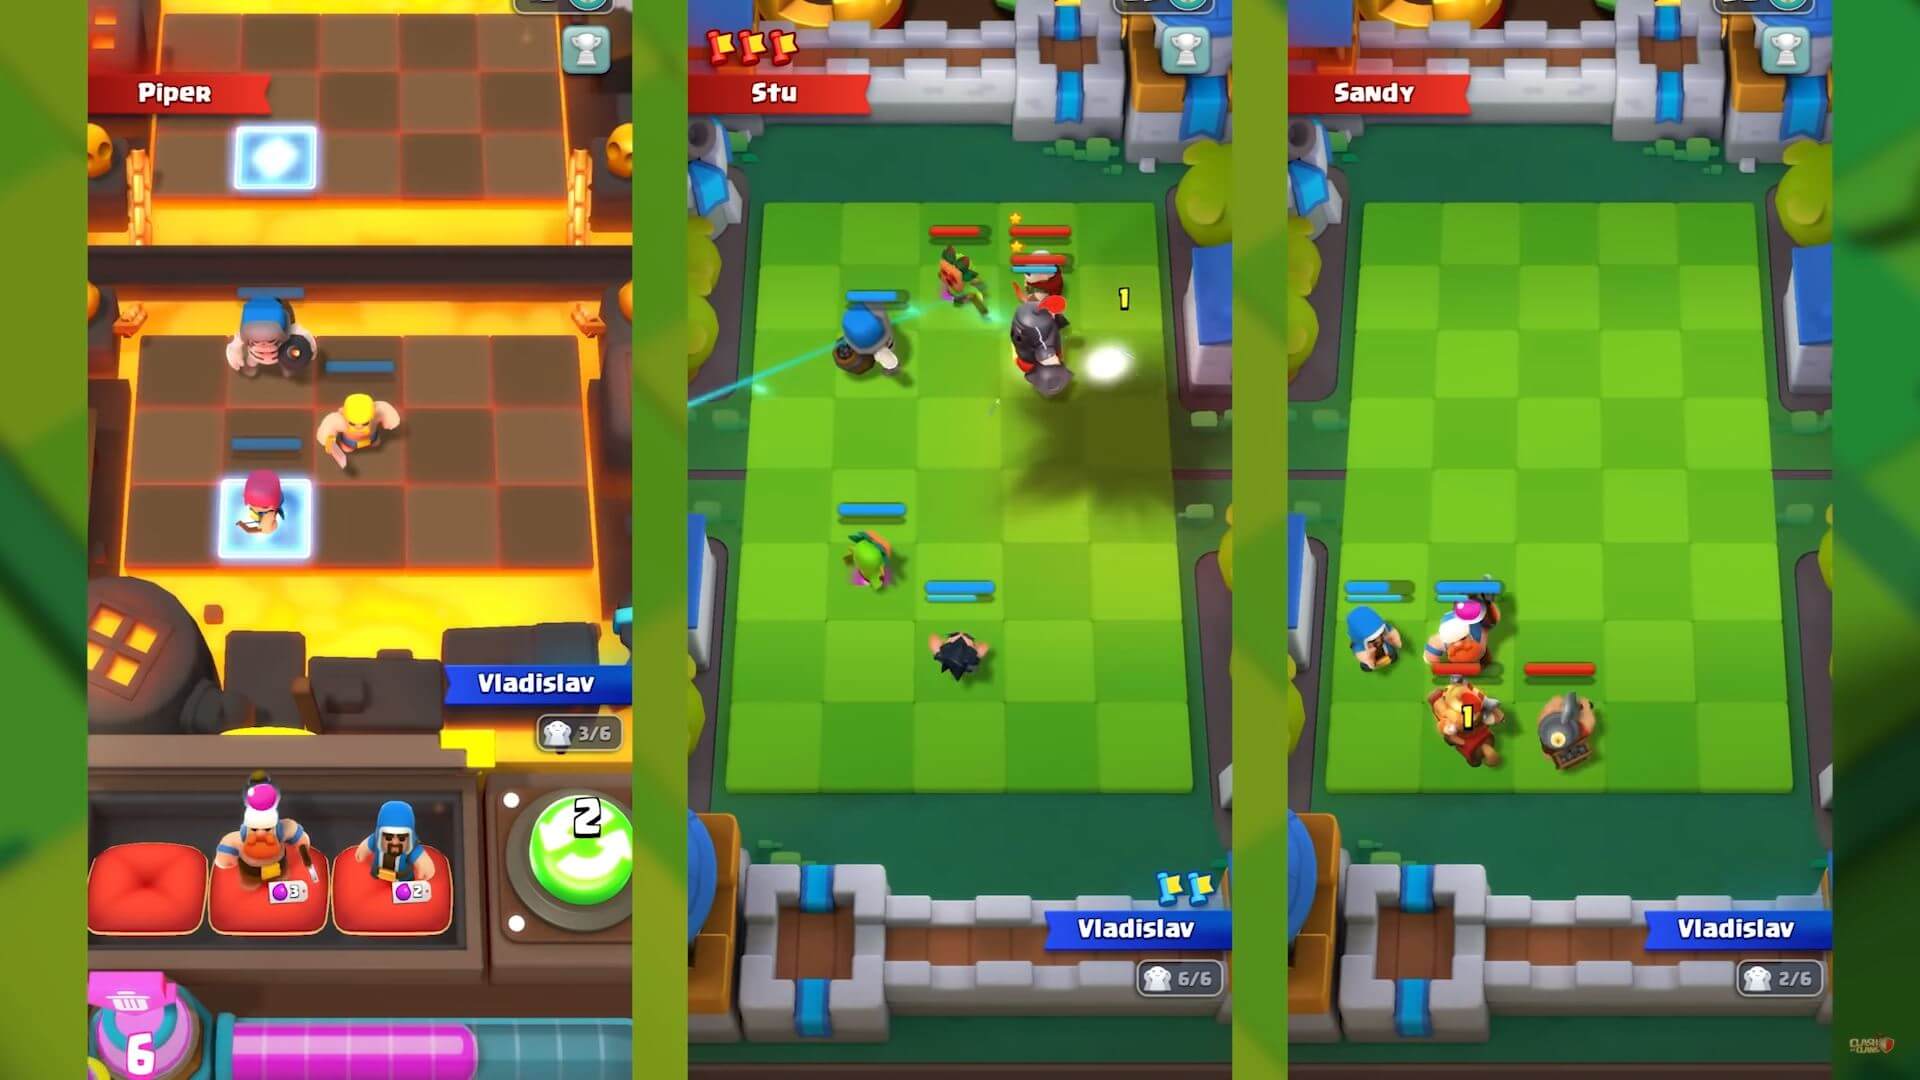 Clash Mini, one of the new games by Clash of Clans developer Supercell